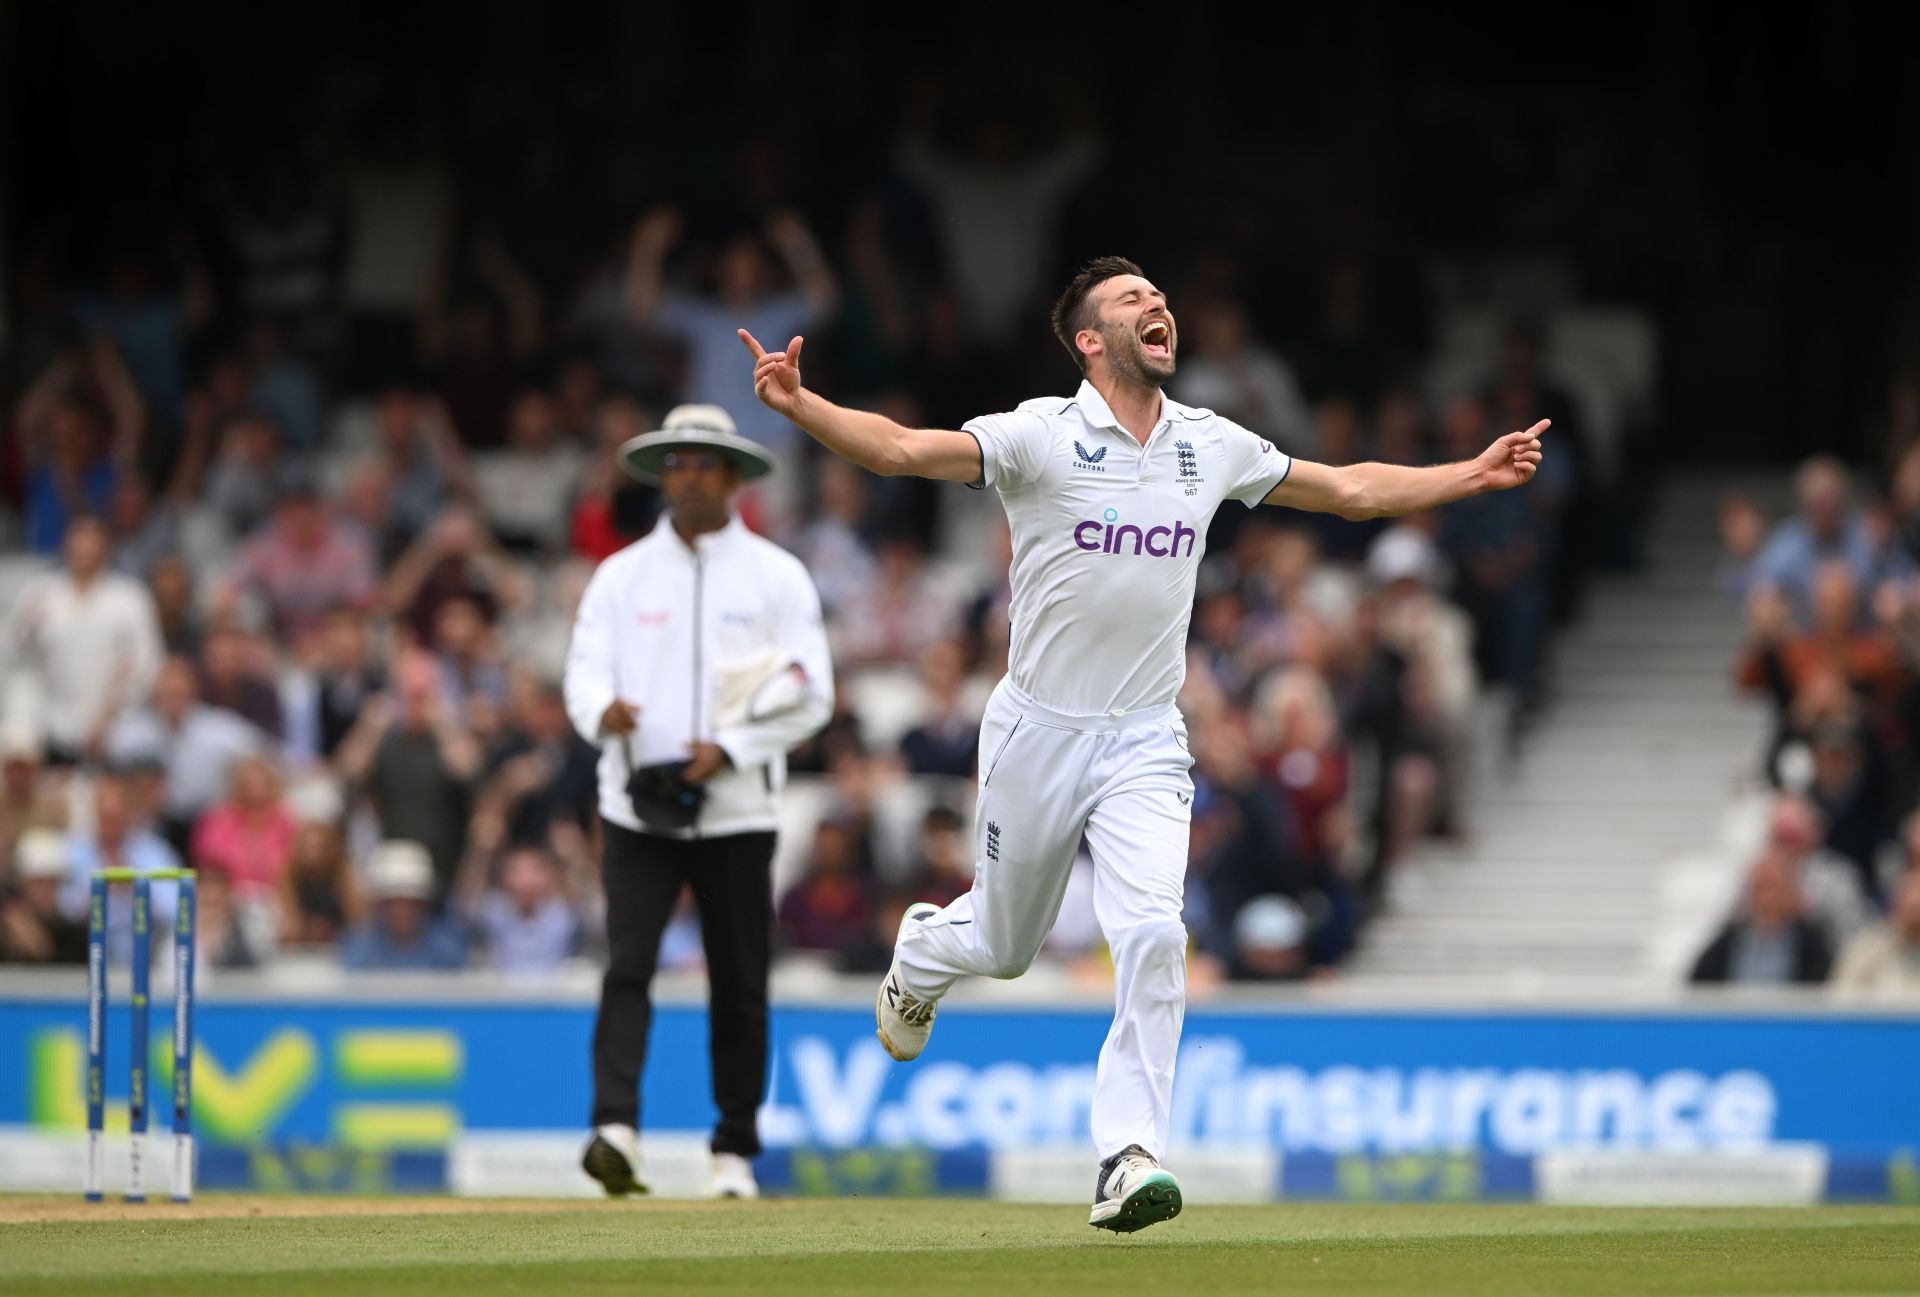 Mark Wood hasn&rsquo;t played a game since the Ashes. (Pic: Getty Images)